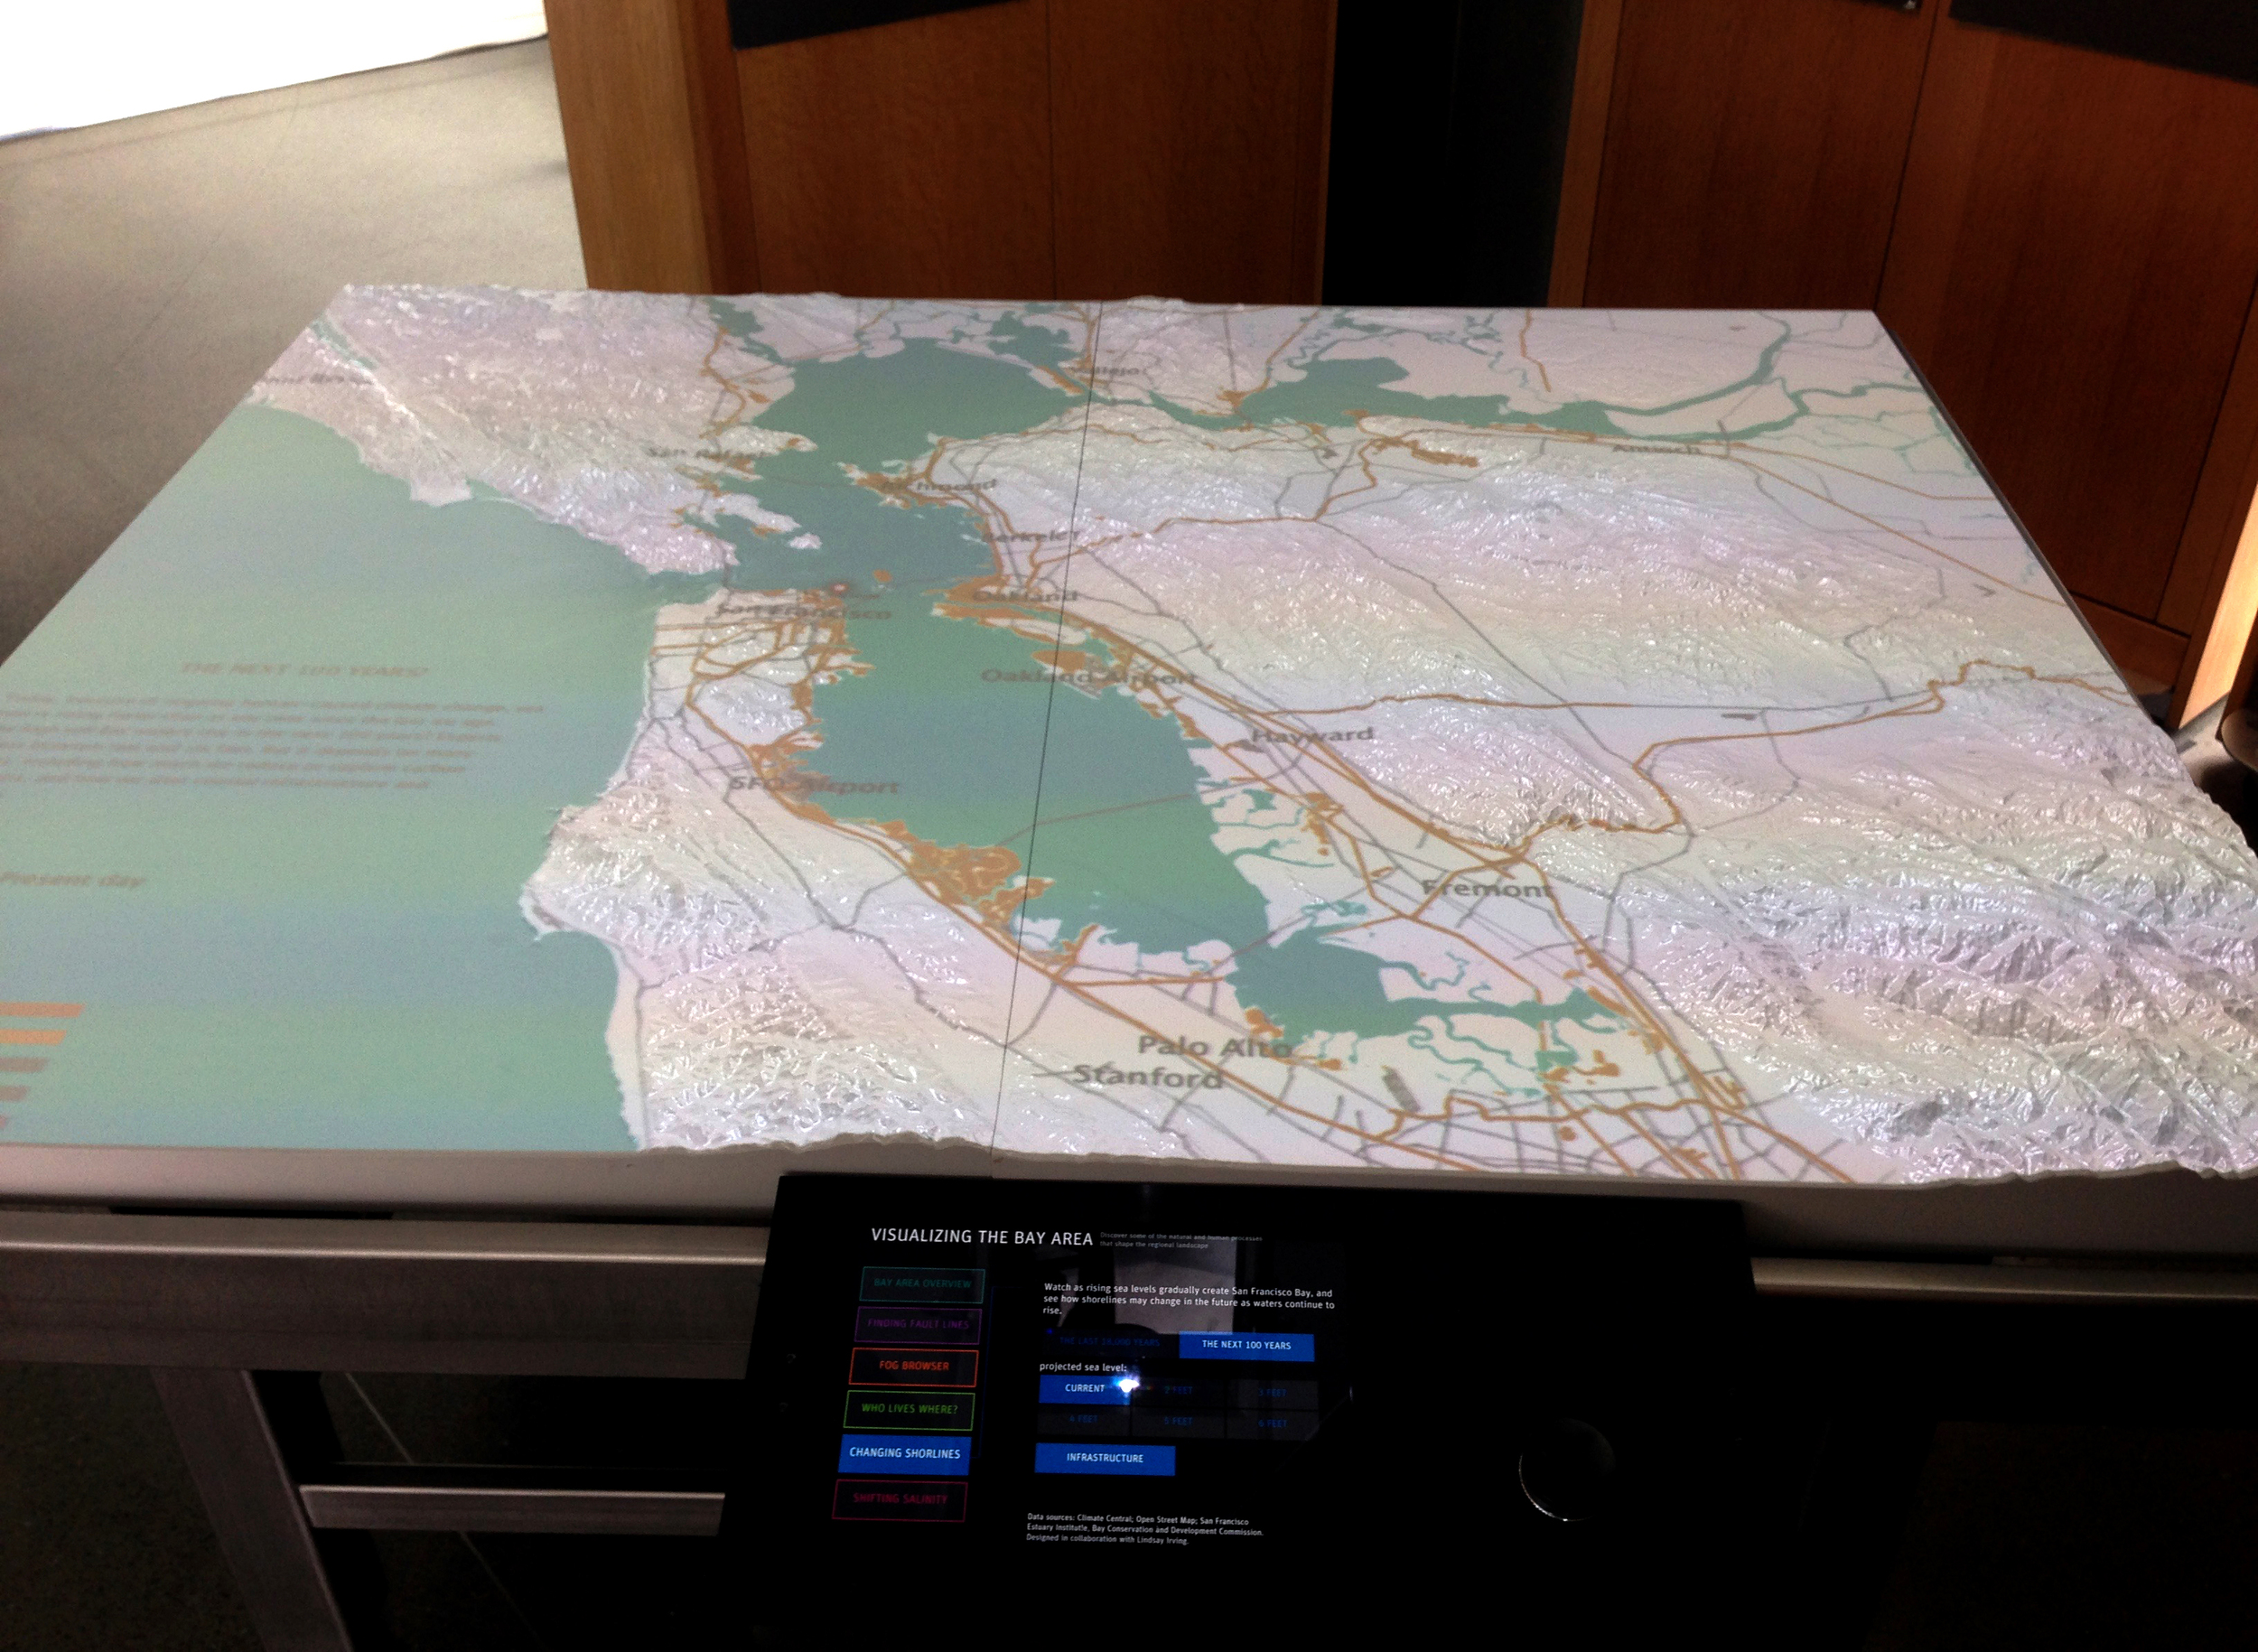  Visitors can select the "Past 18,000 years" or "the Next 100 years" on a tablet and scroll through sea level elevations that are projected onto the 3D table. Data sources: USGS, NOAA, SFEI, Climate Central, UC Santa Barbara, MapZen's OSM MetroExtrac